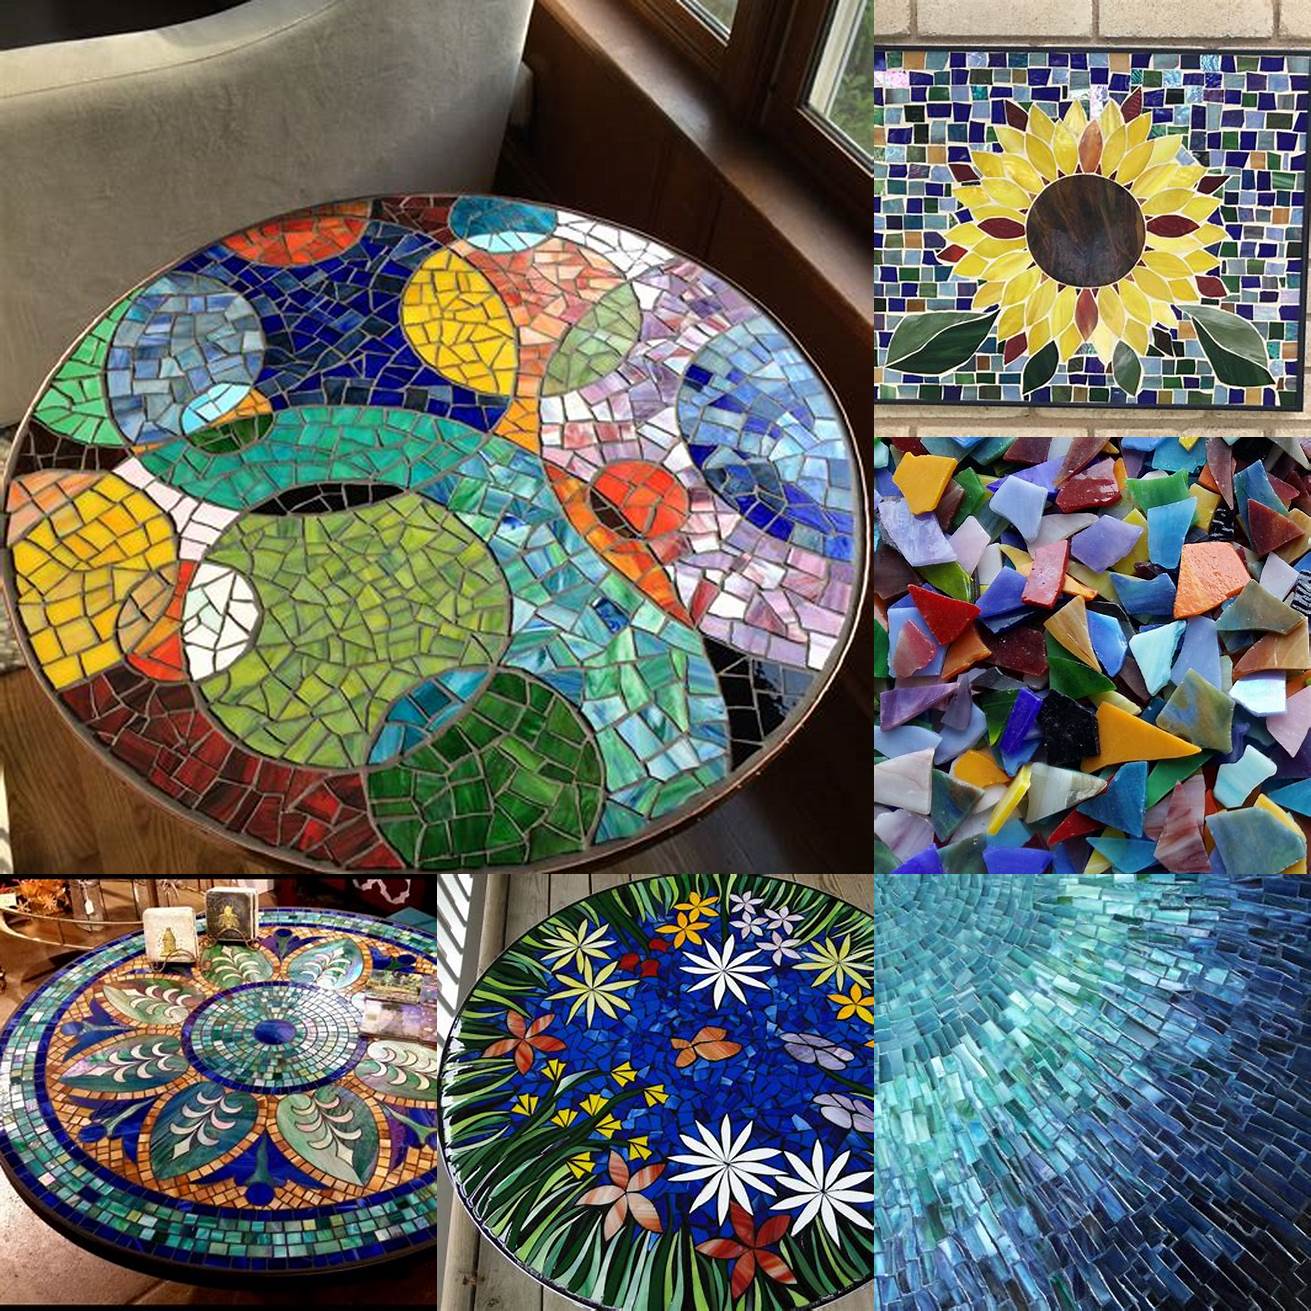 Mosaic tiles with a stained glass effect